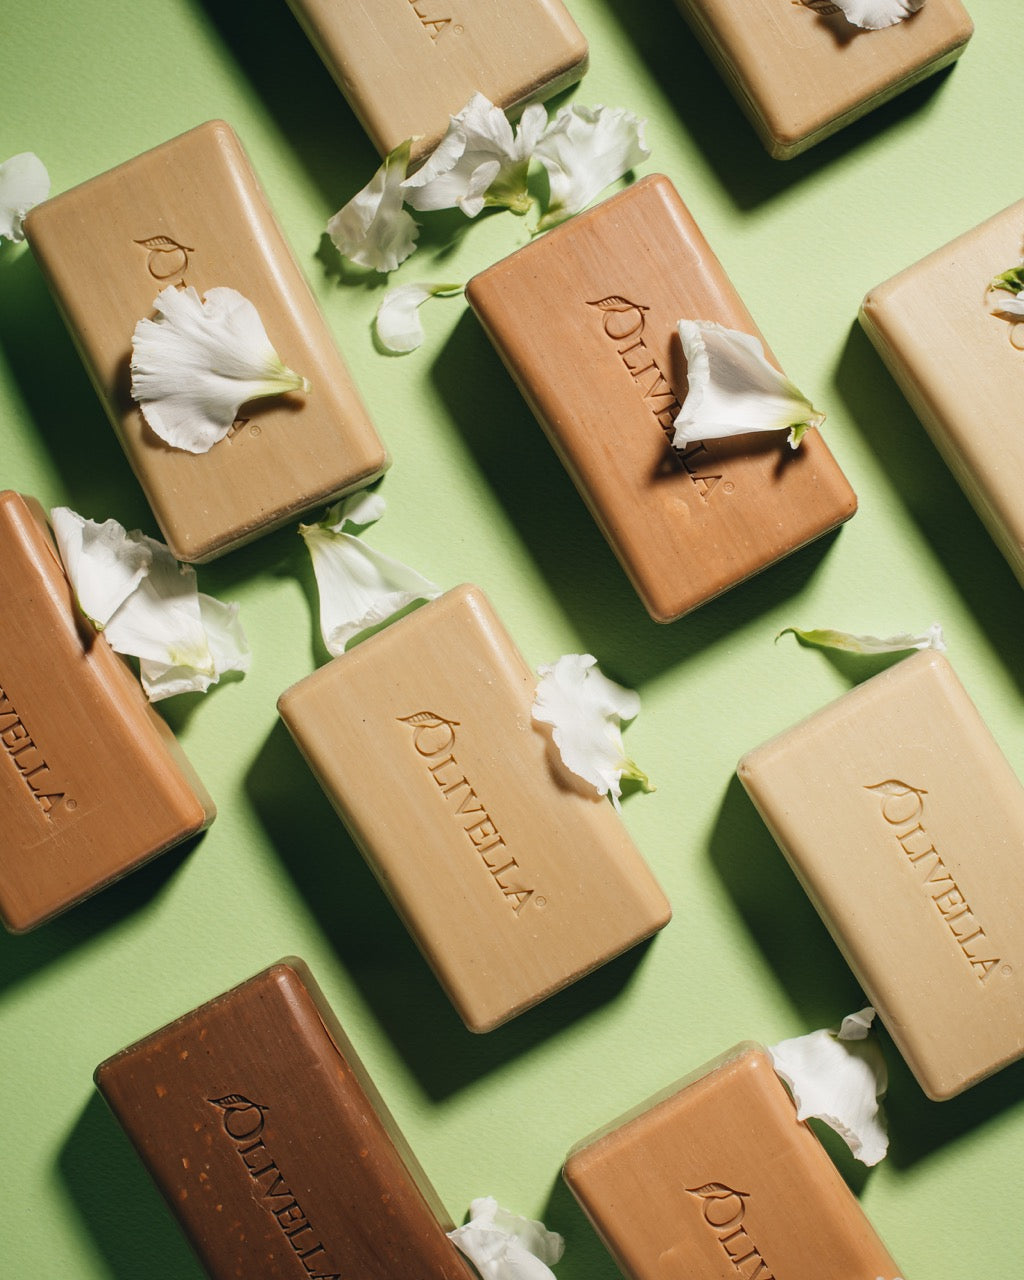 Olive Oil Soaps from Olivella